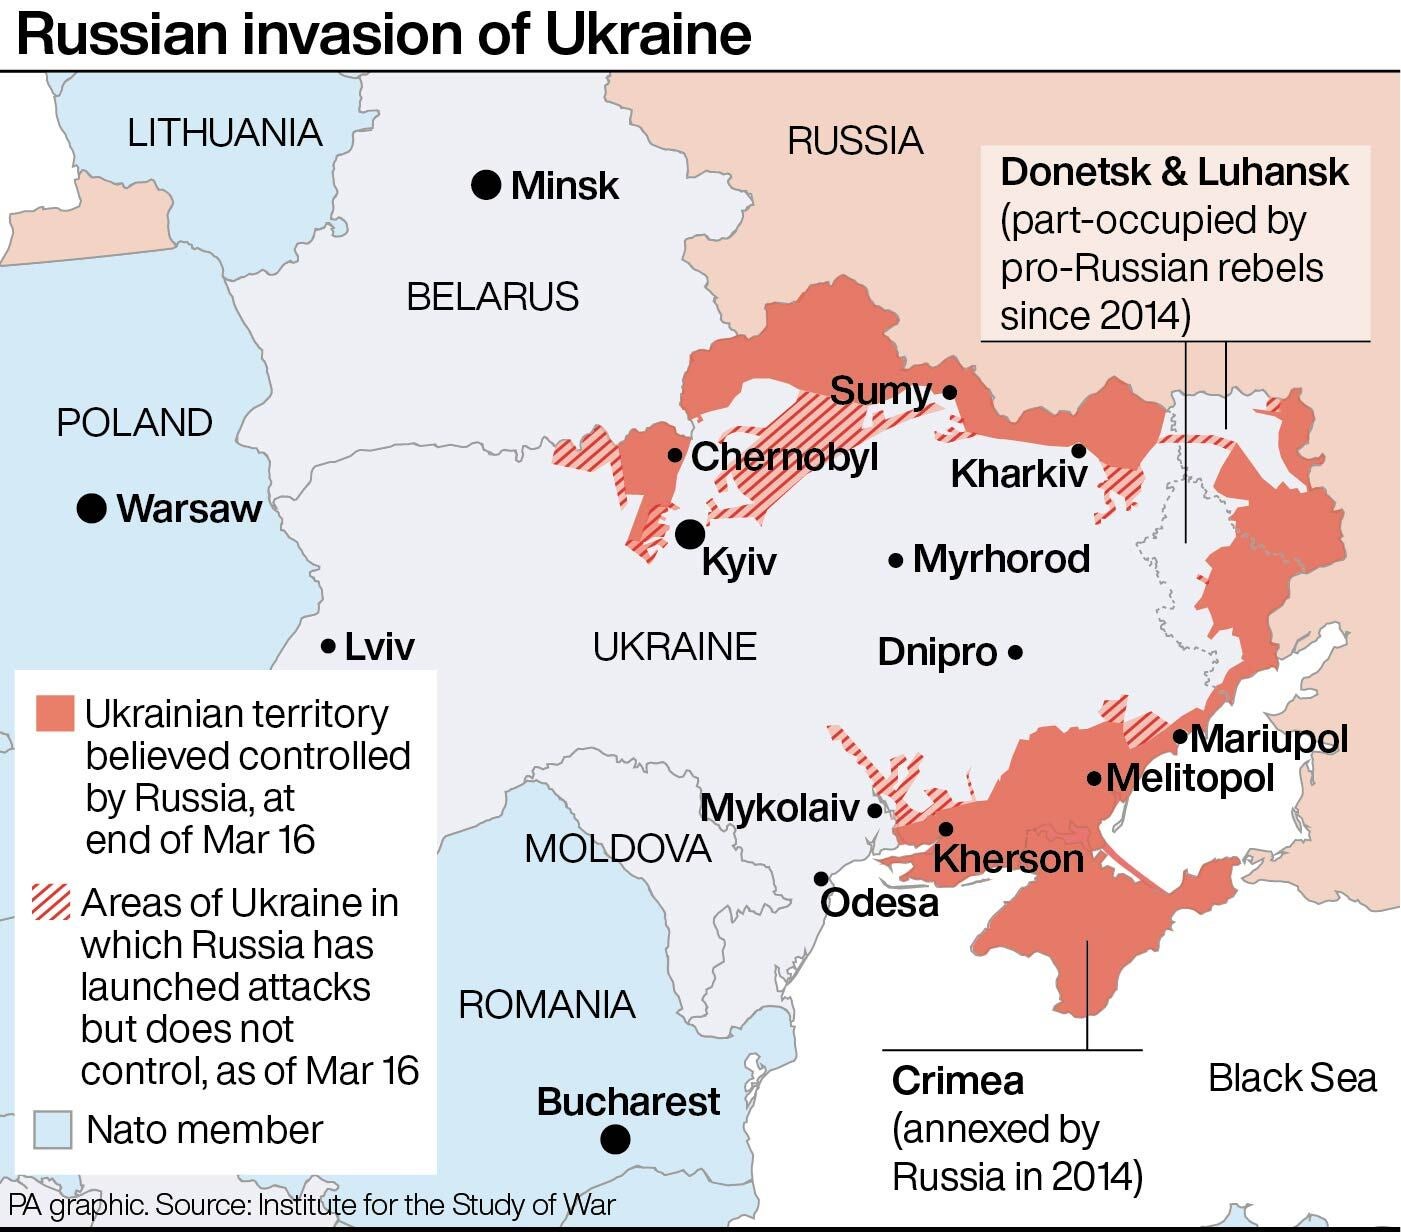 This map shows the extent of Russia’s invasion of Ukraine